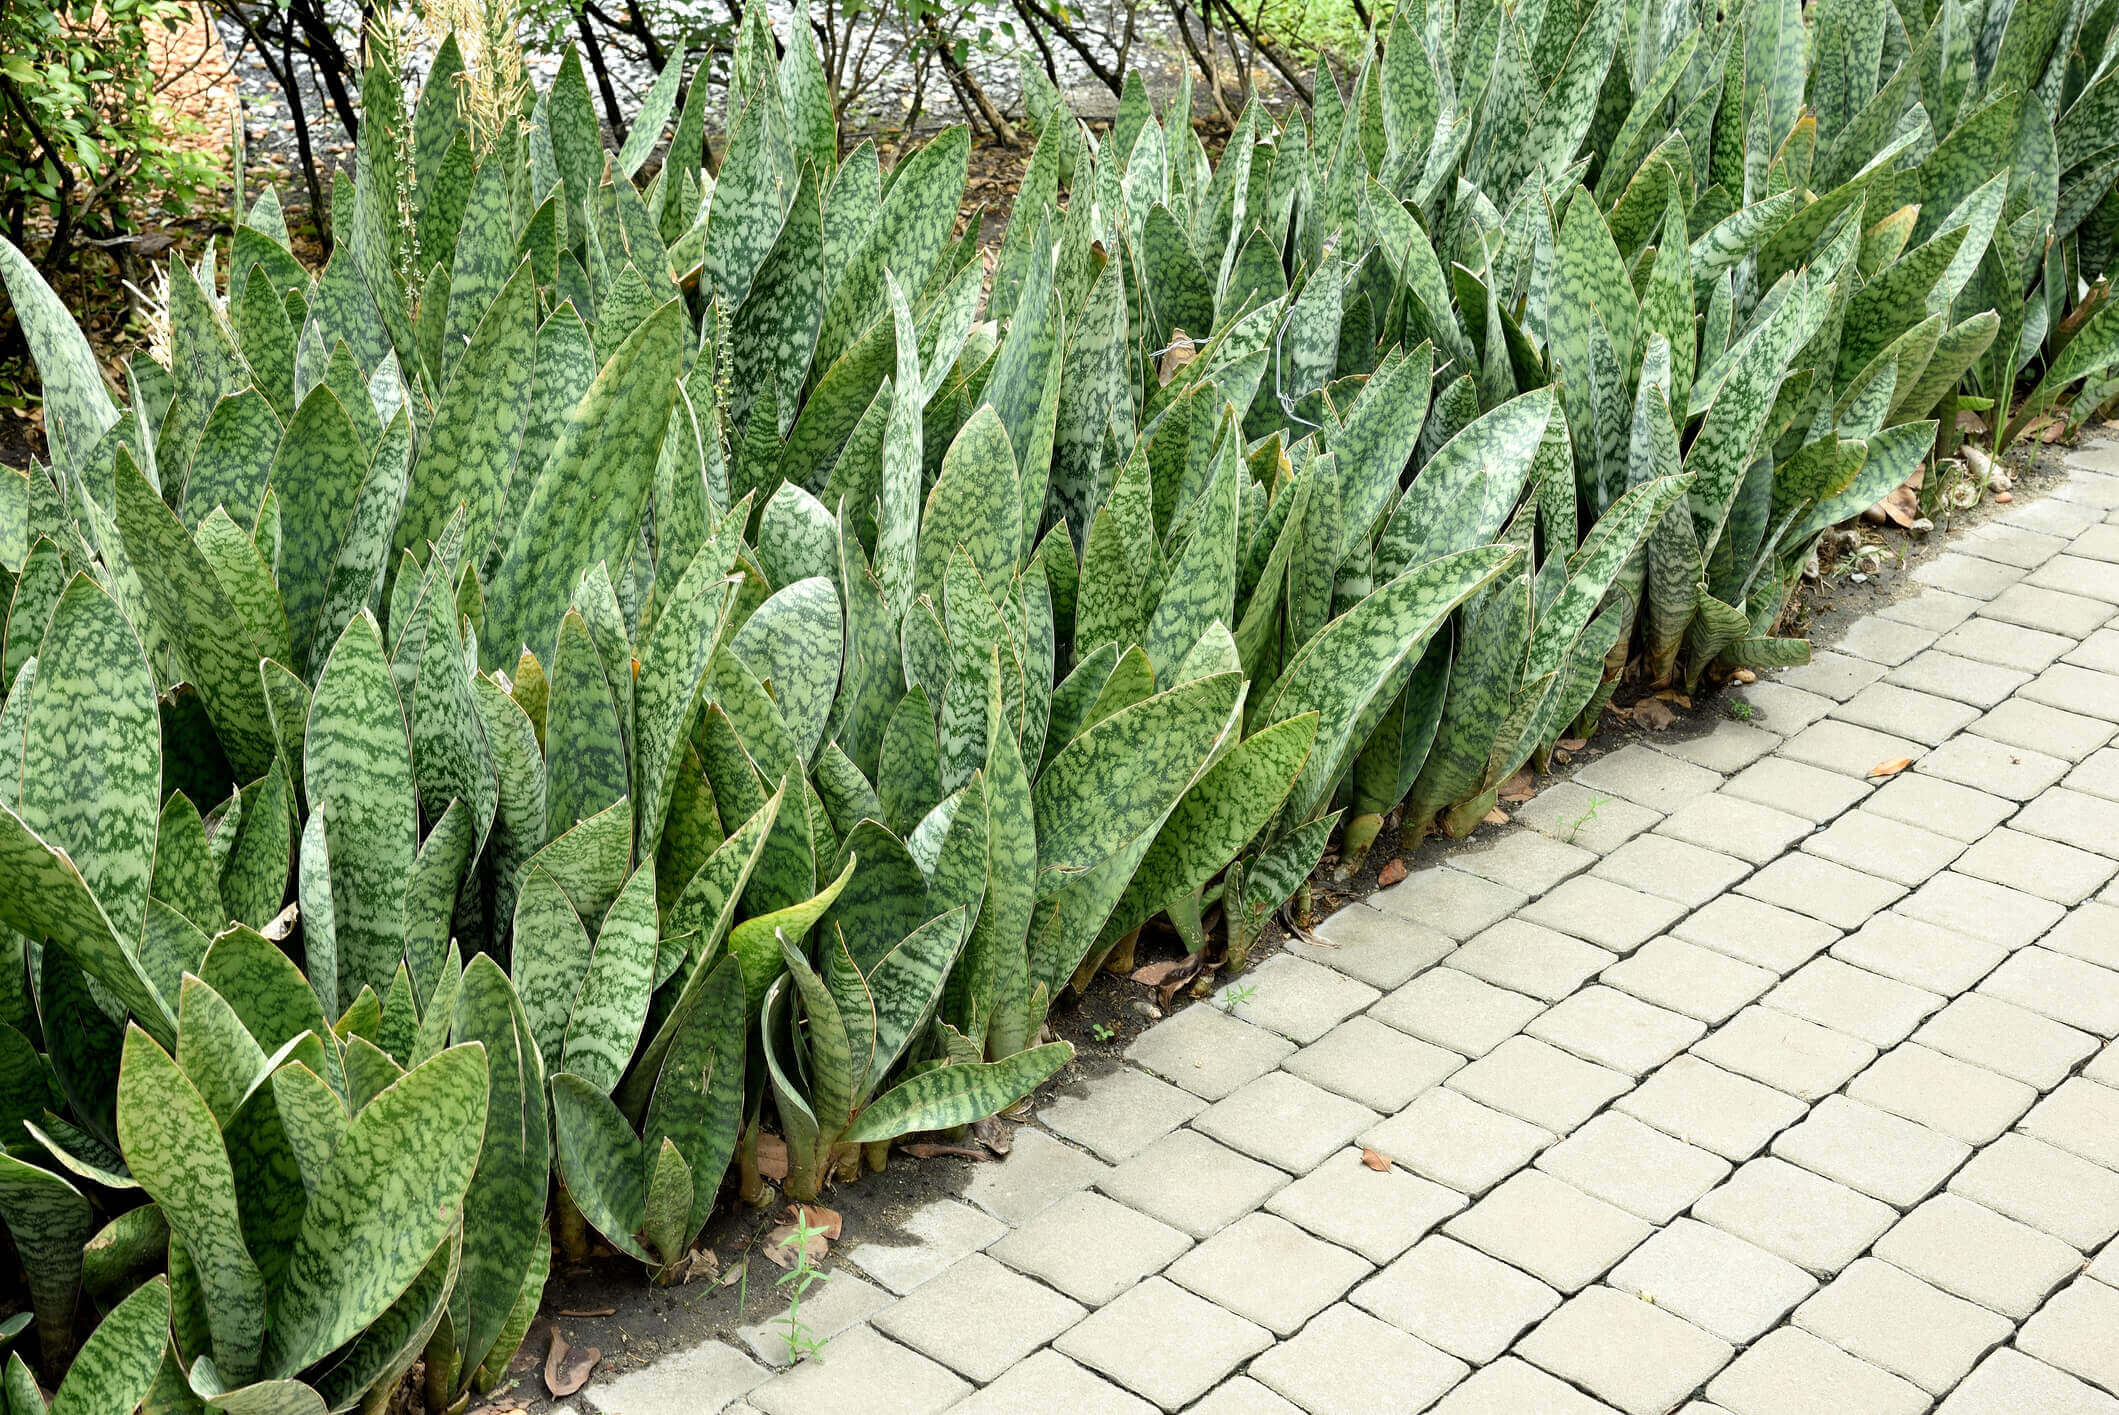 Snake plants planted along a paved walkway